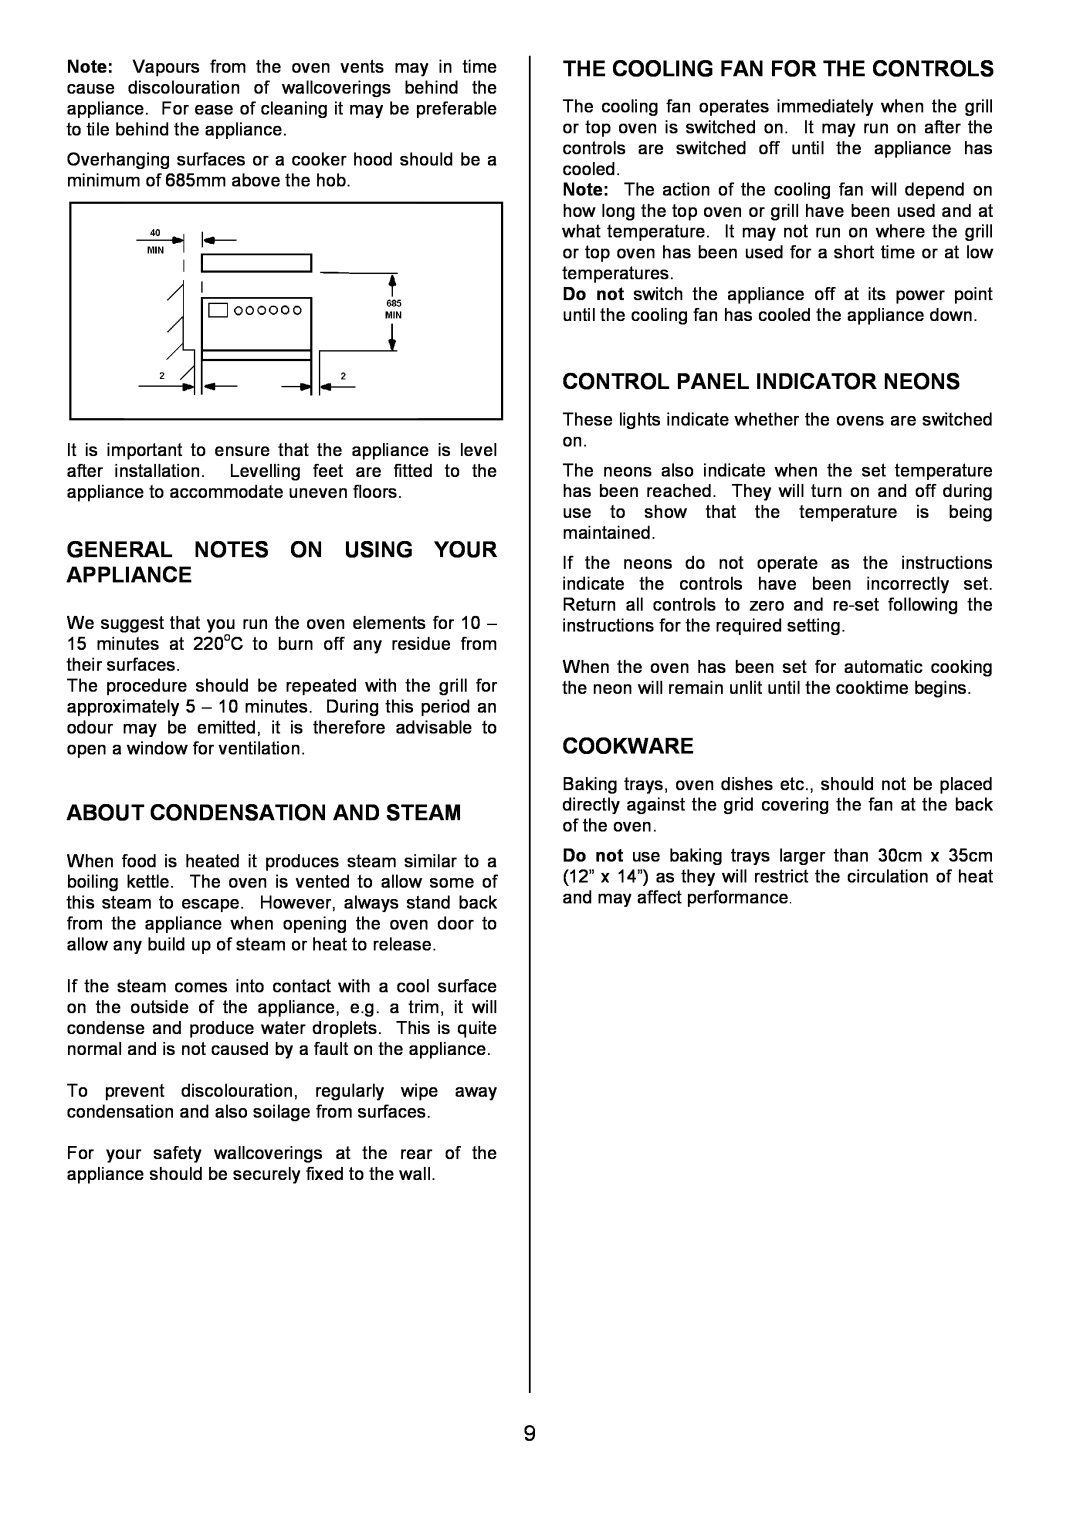 Tricity Bendix CSE560 General Notes On Using Your Appliance, About Condensation And Steam, Control Panel Indicator Neons 